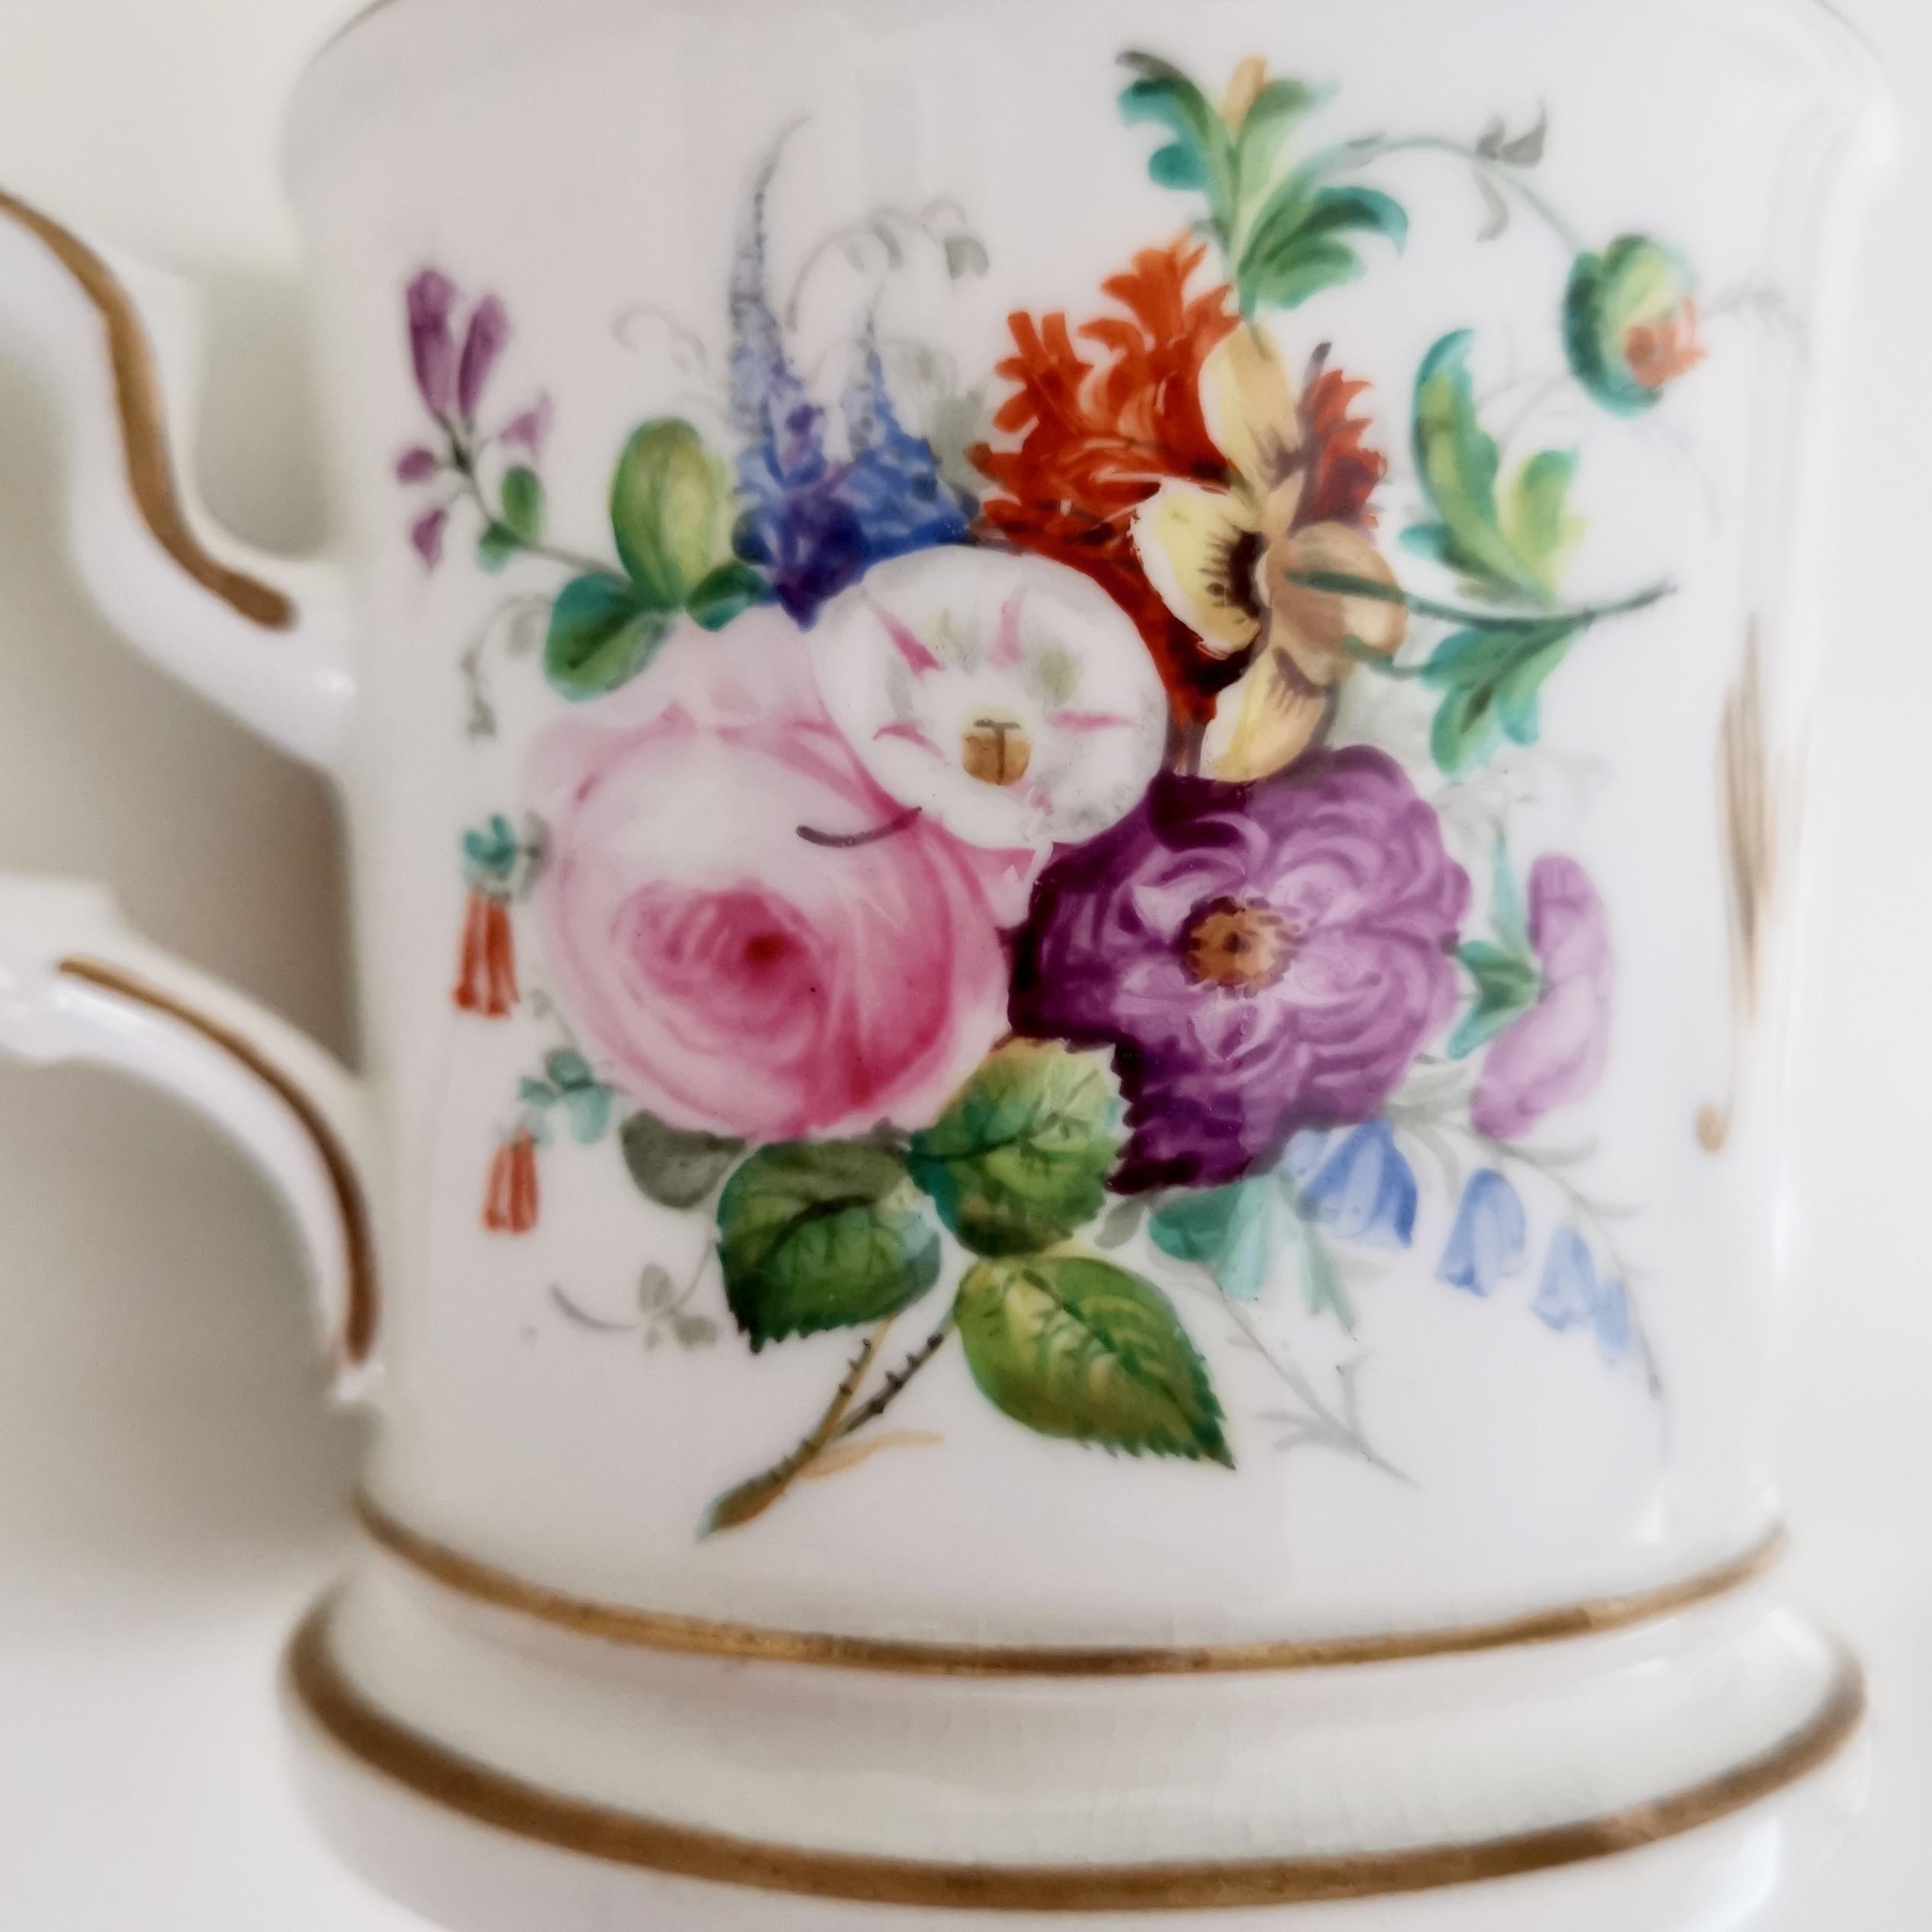 Staffordshire Porcelain Christening Mug, White with Flowers, Victorian, 1867 1